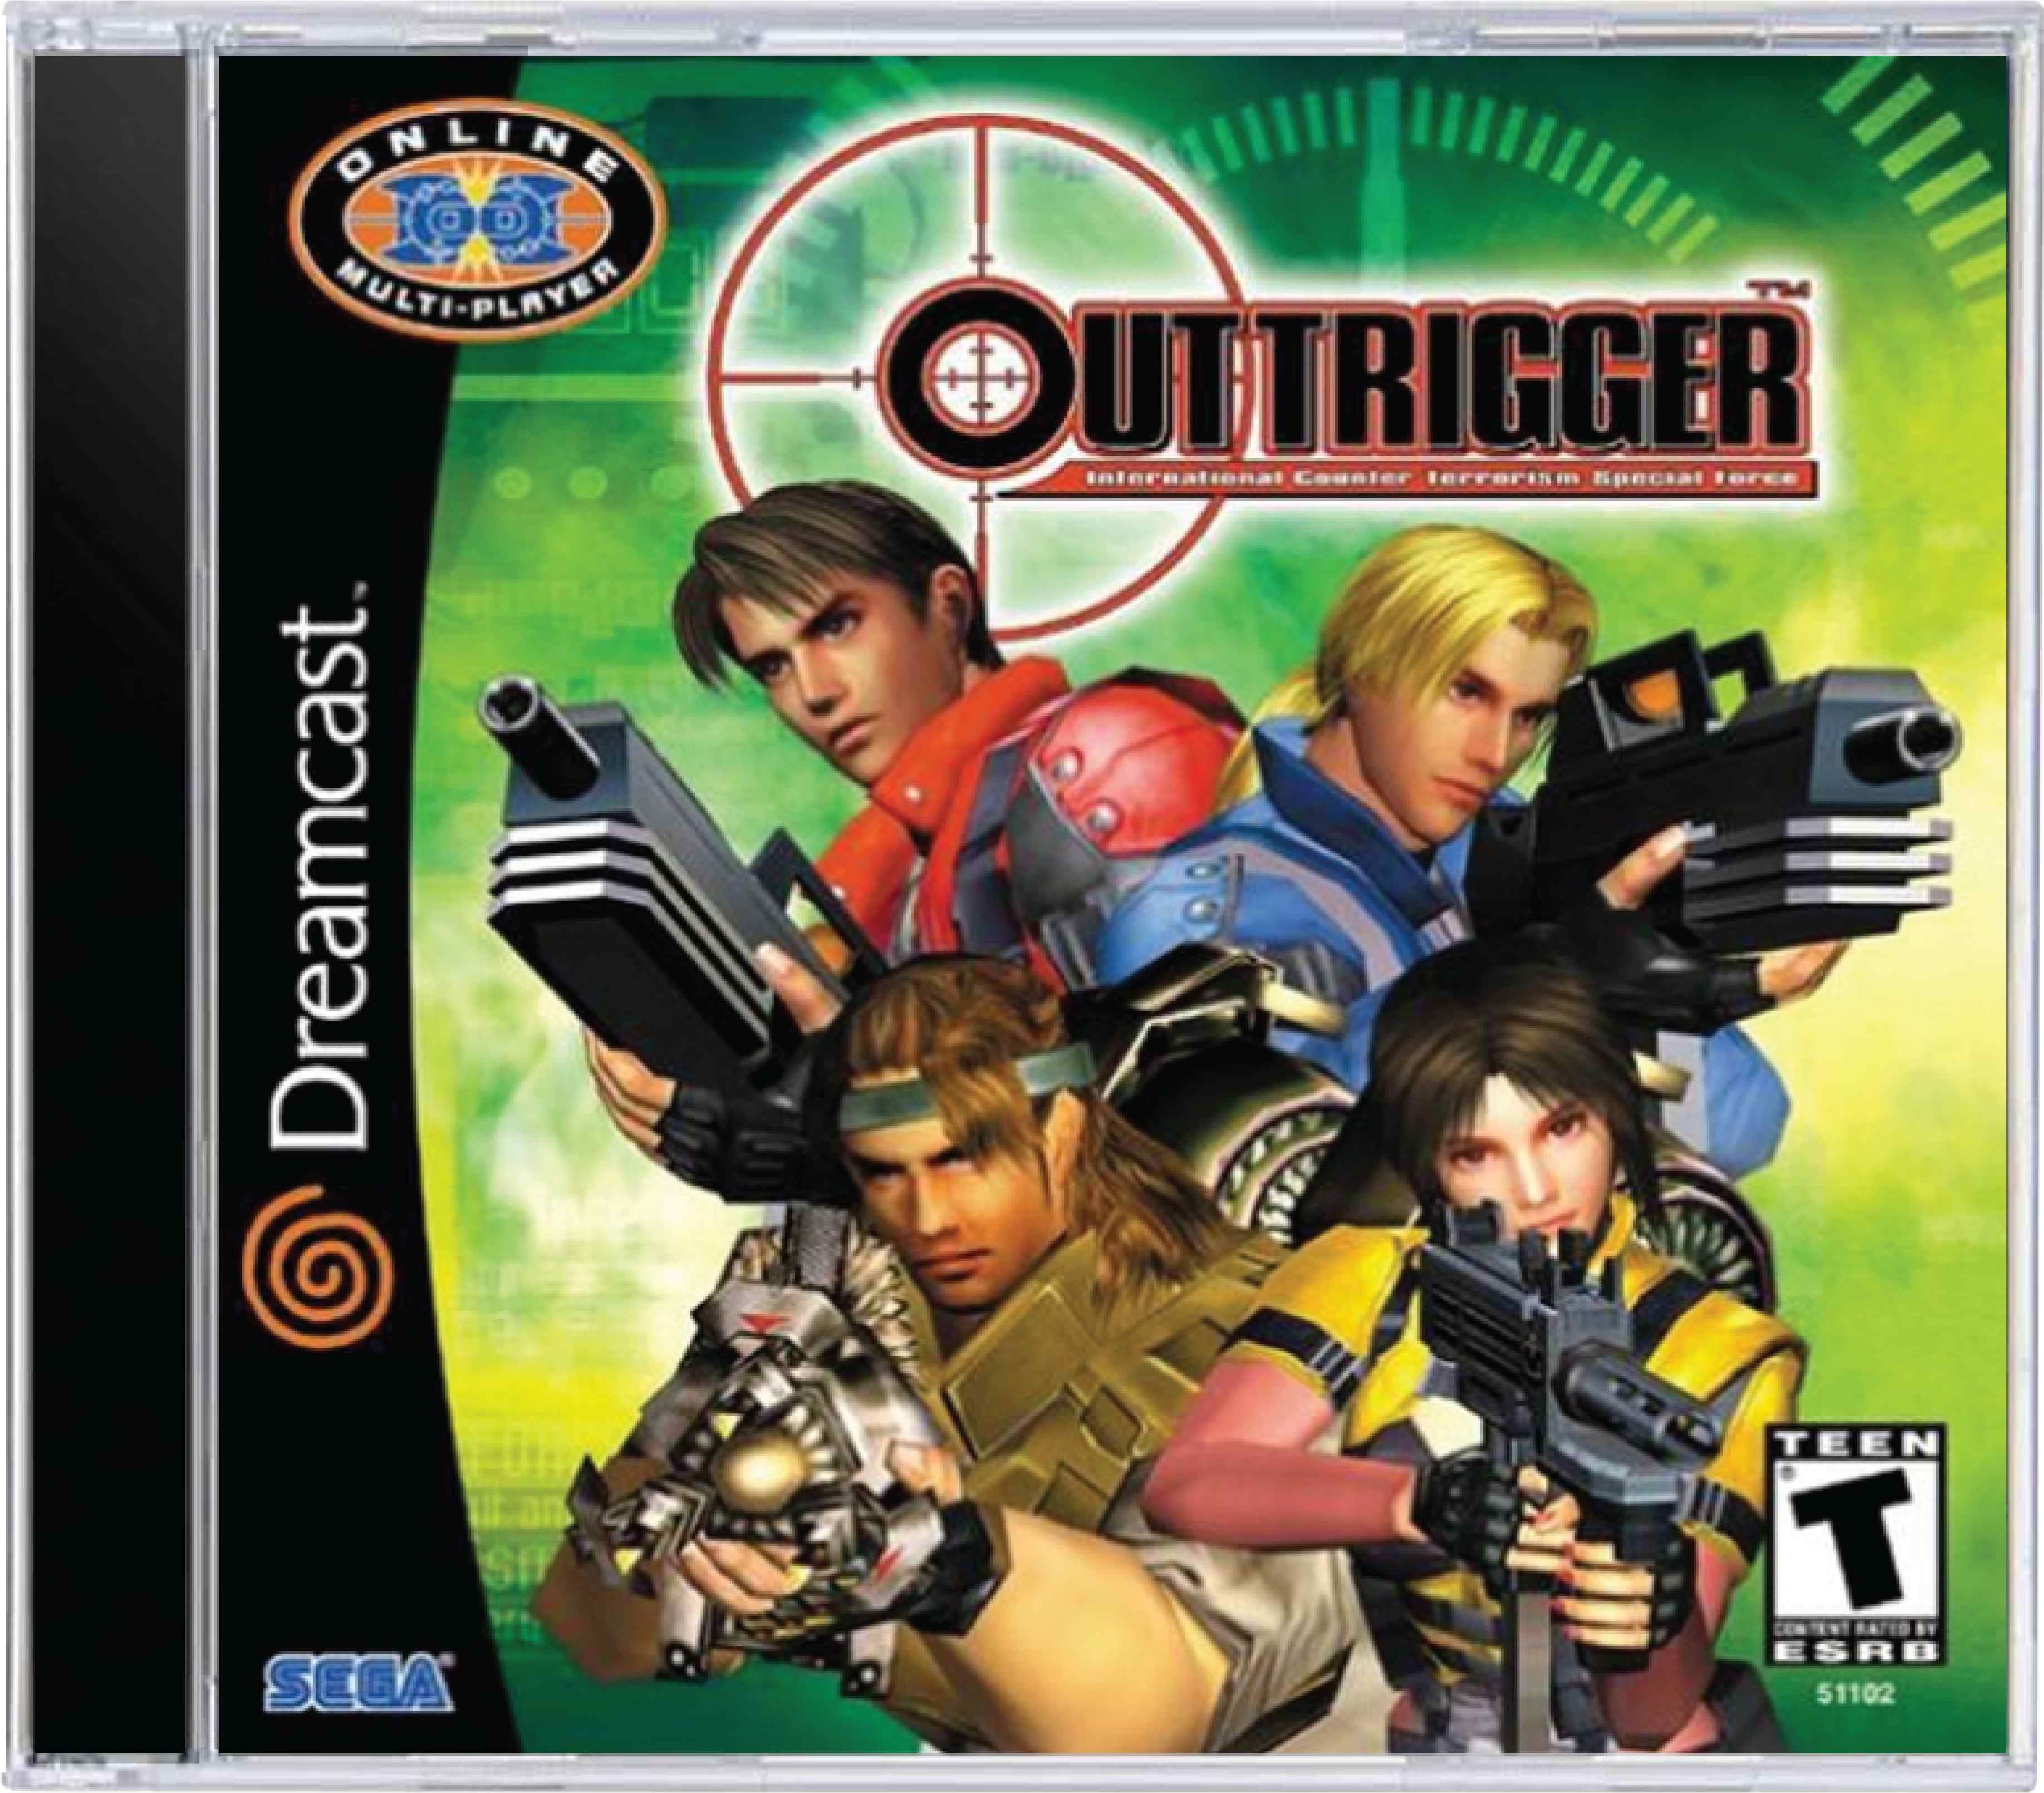 Outtrigger Cover Art